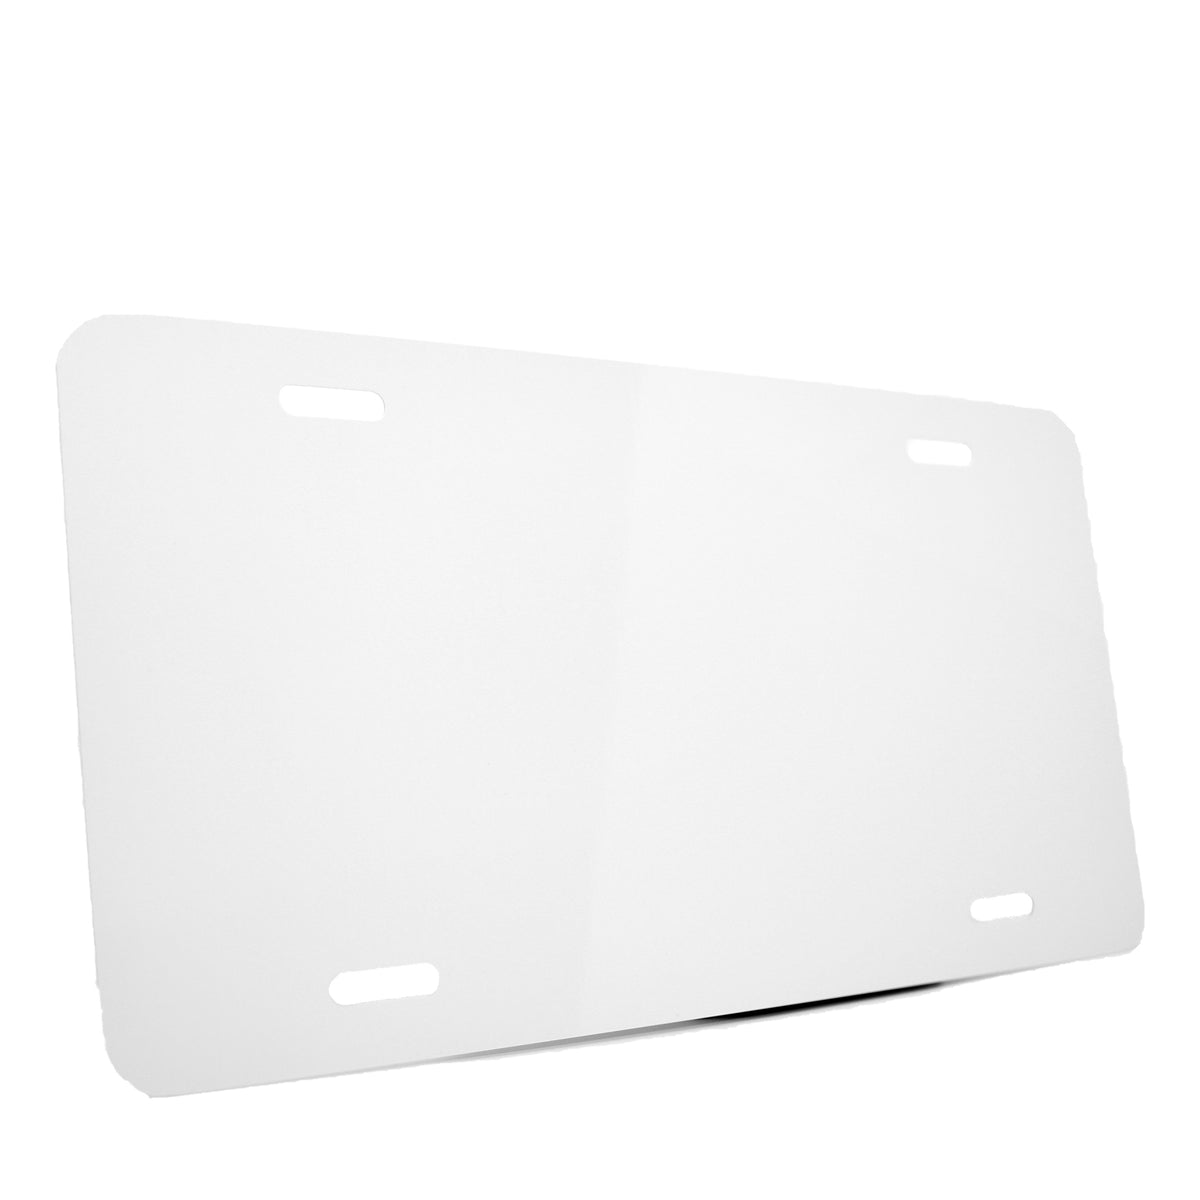 Sublimation license plate blanks – Tailored Vinyl